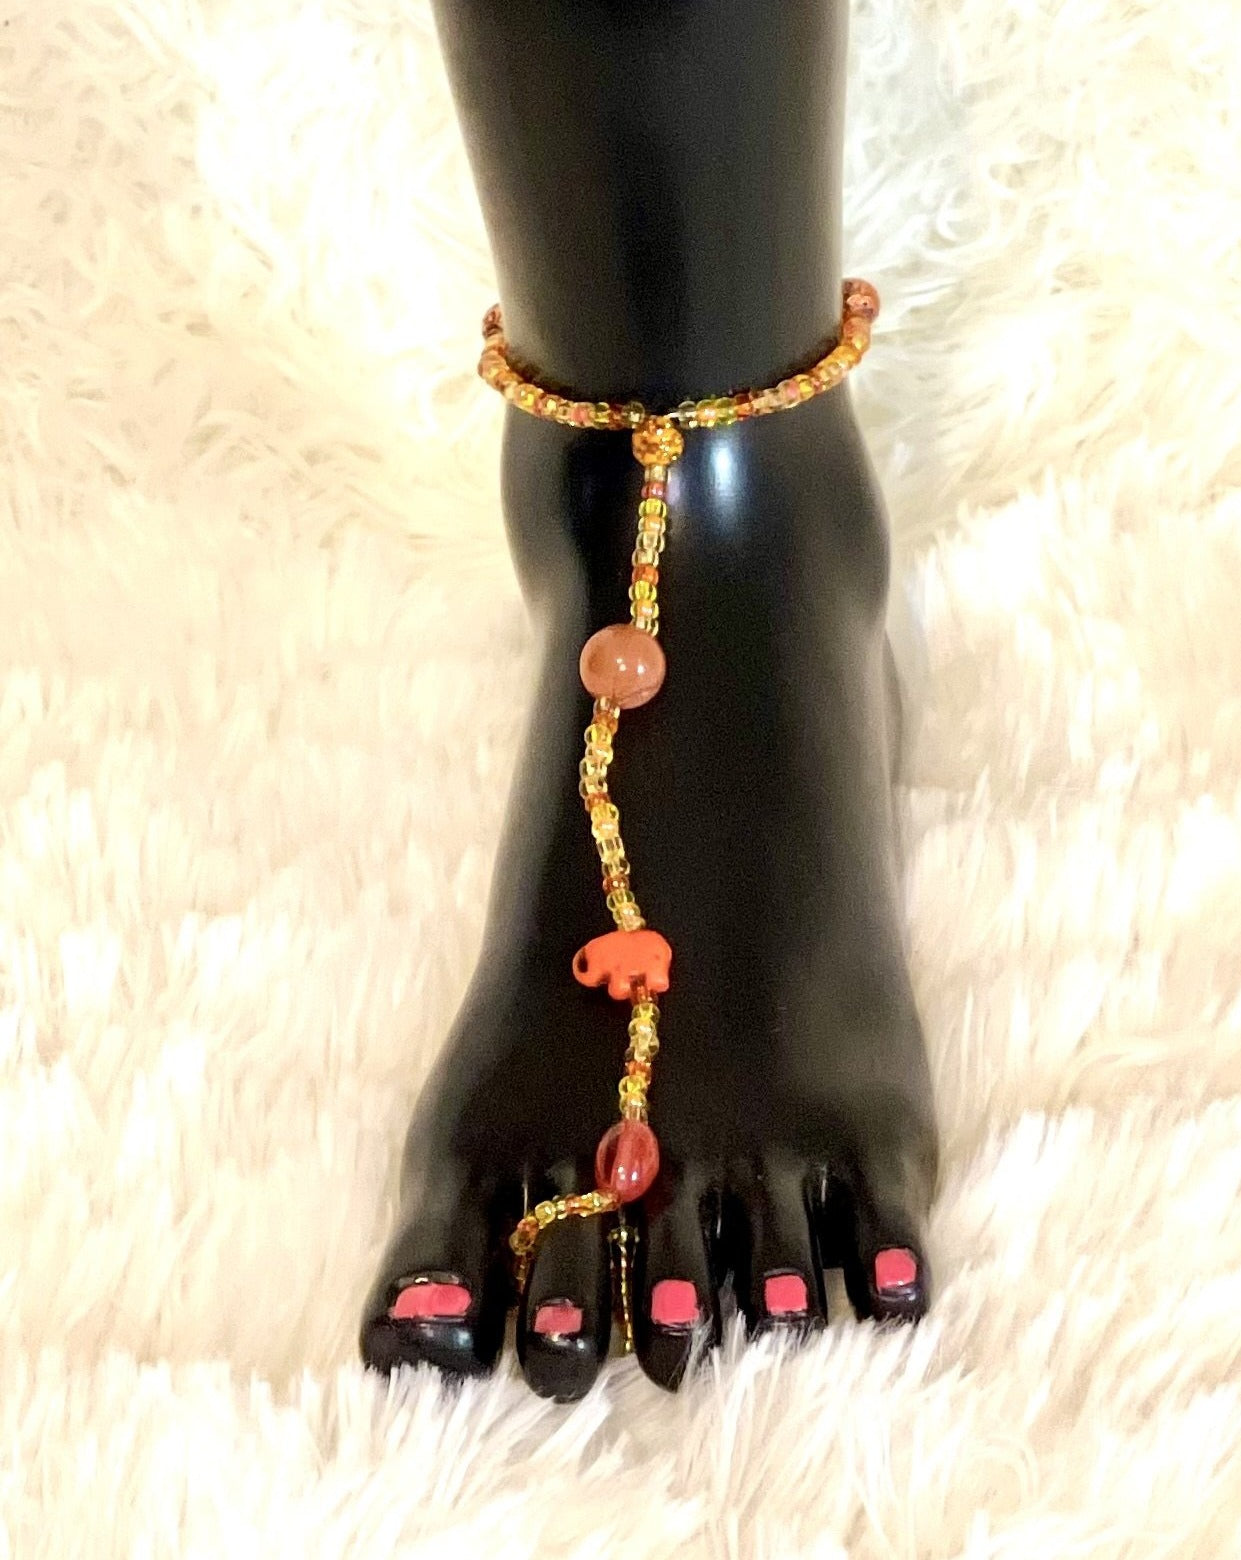 Handmade Jewelry for your feet barefoot sandals orange seed beads and lava rock - E-monaejewels "LLC"